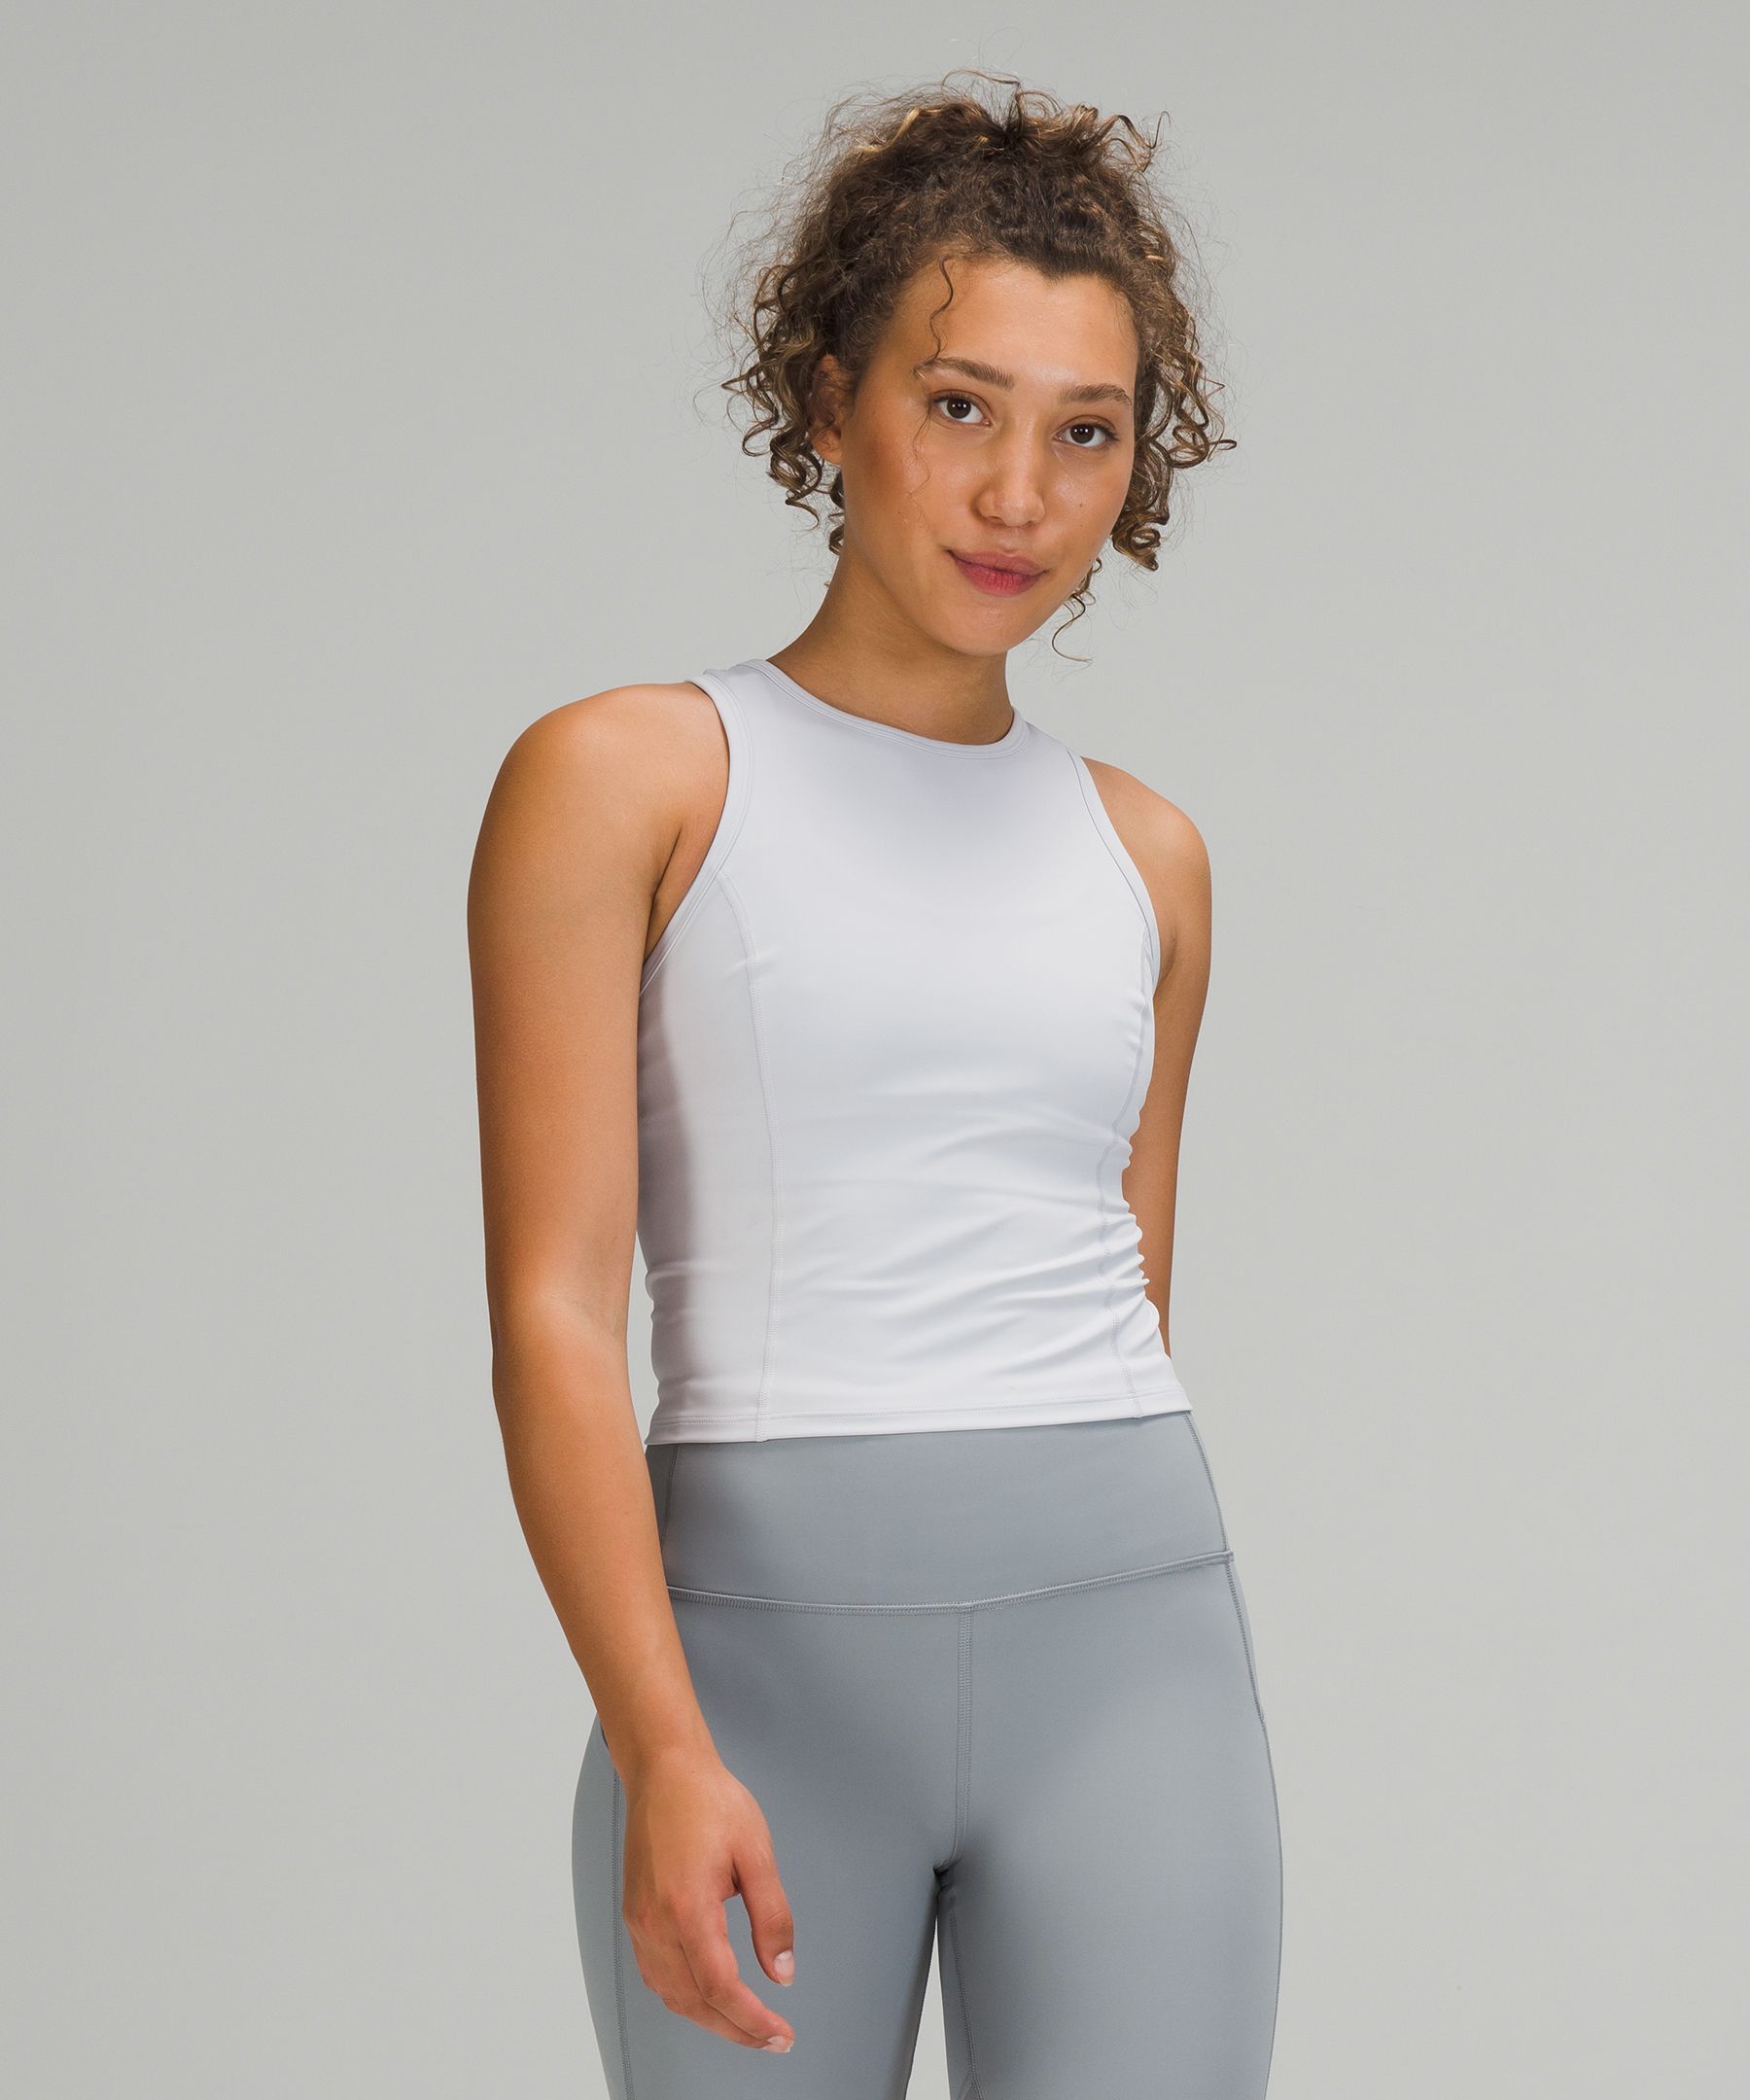 Lululemon Base Pace High-Rise Tights 28 Brushed Nulux - ShopStyle  Activewear Pants